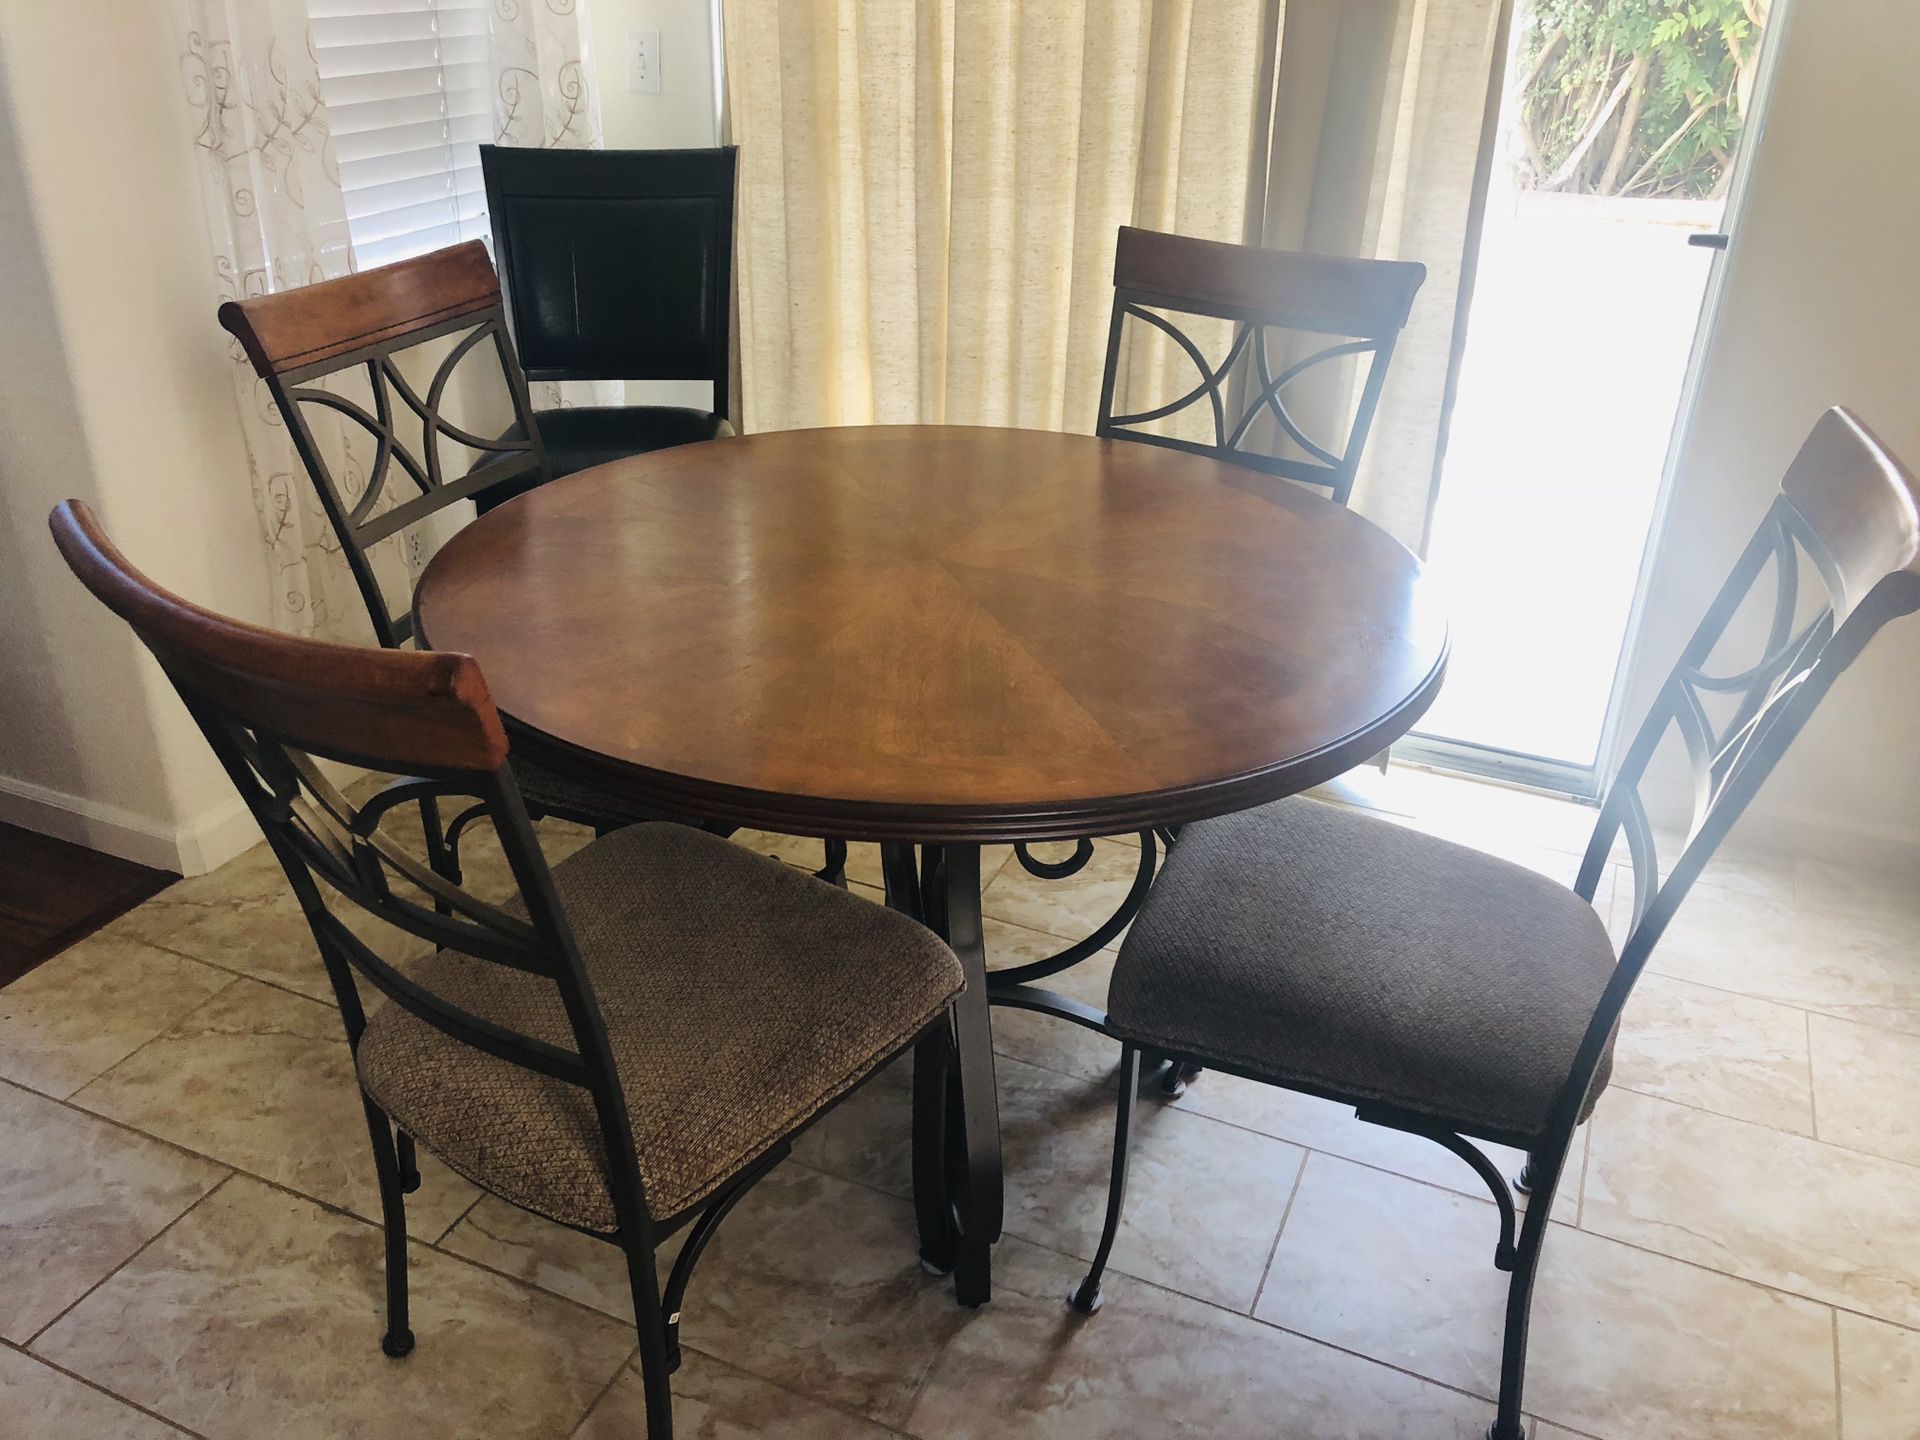 Perfect Kitchen Table for 4!! New condition!